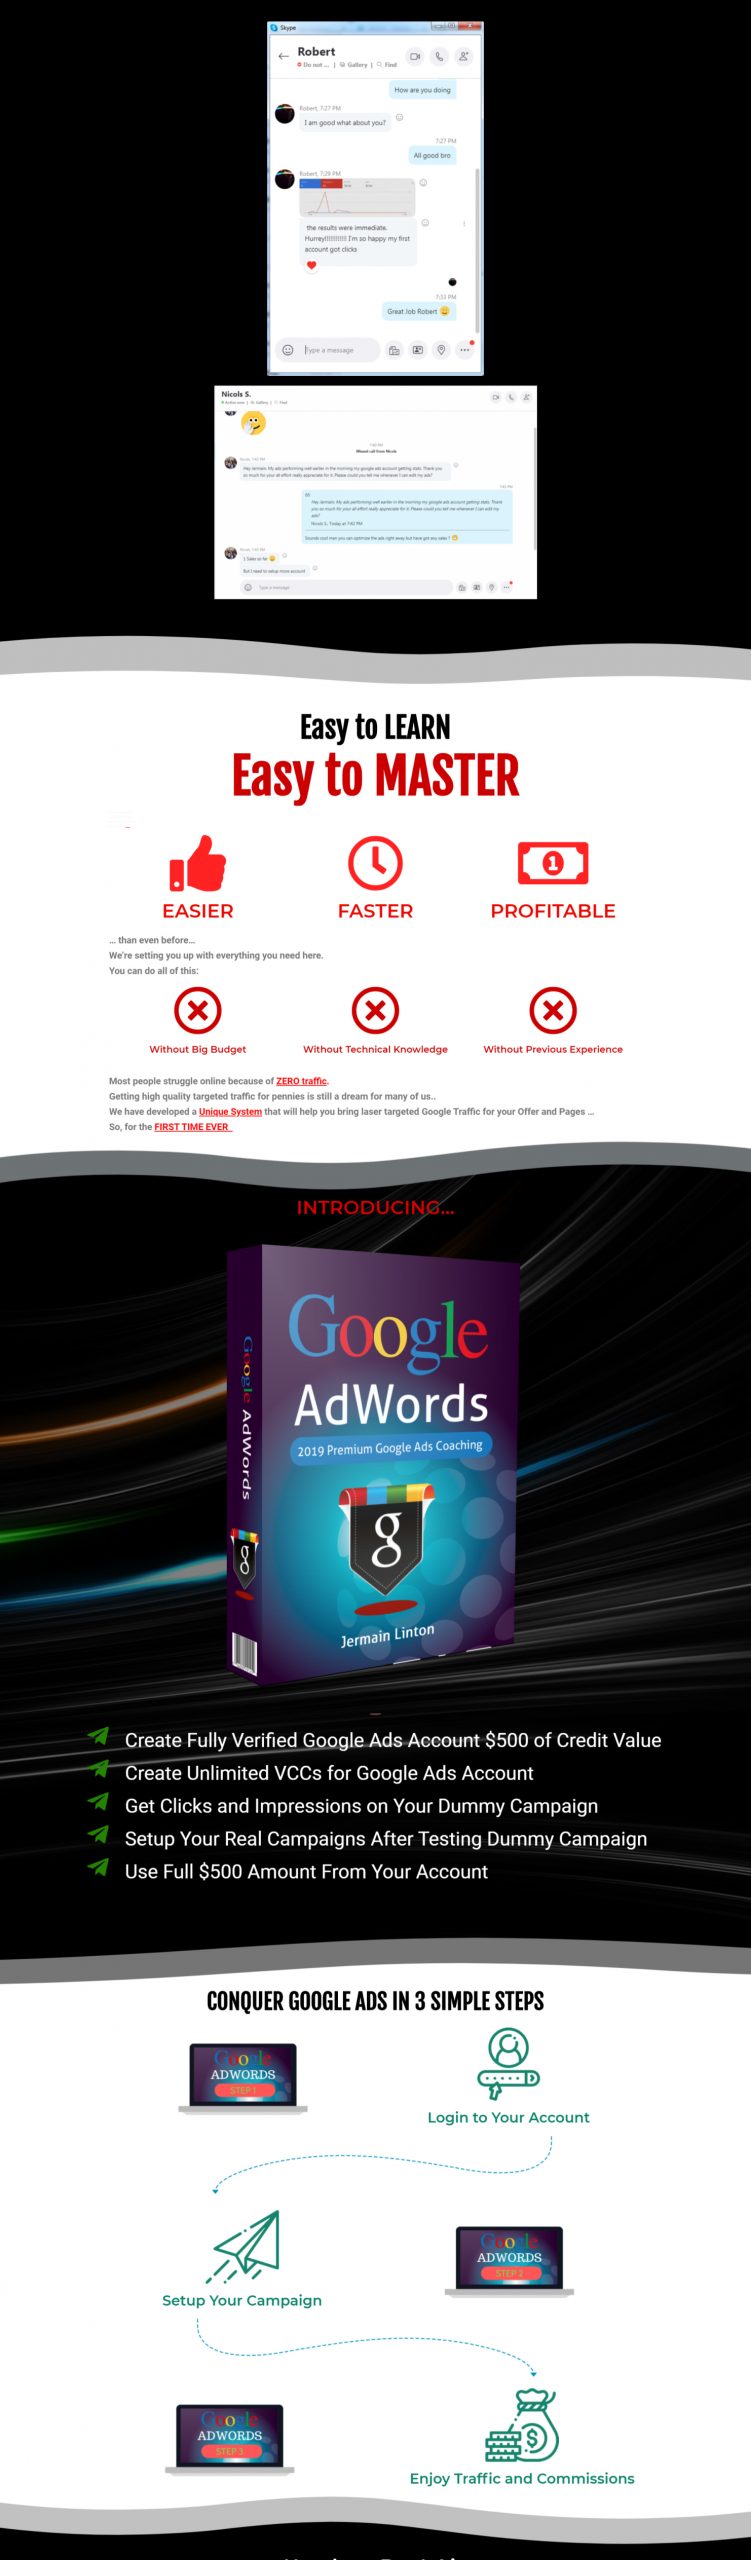 [Download] Create Unlimited $500 Credit Adwords Accounts and VCCs - 2020 Edition 4